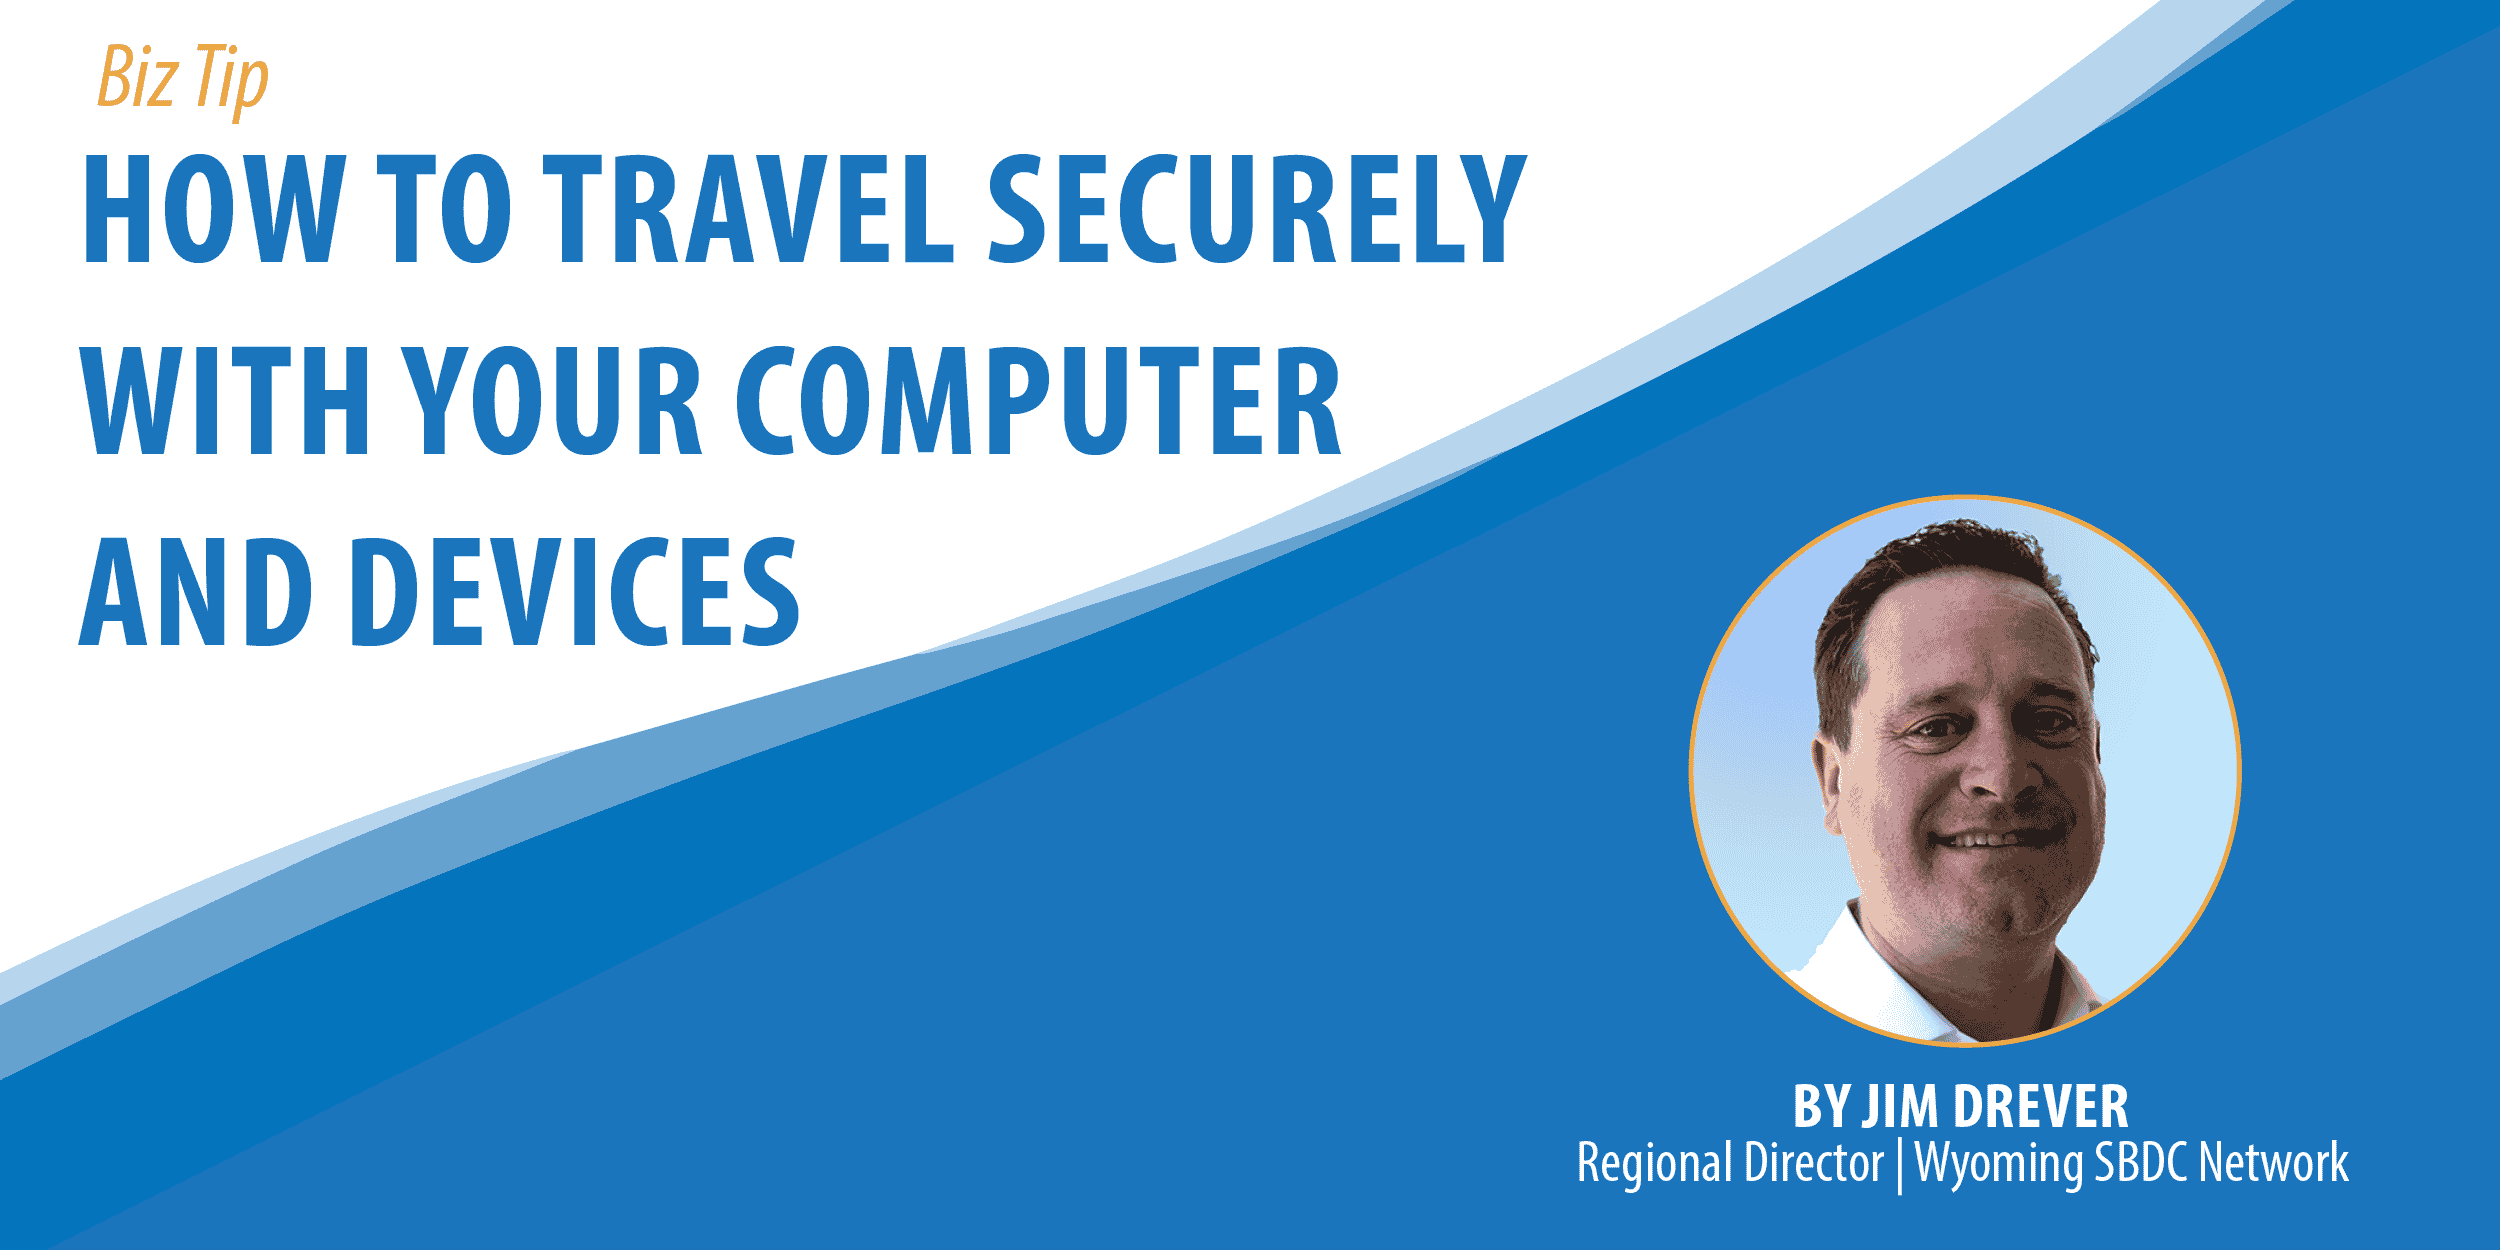 How To Travel Securely With Your Computer and Devices